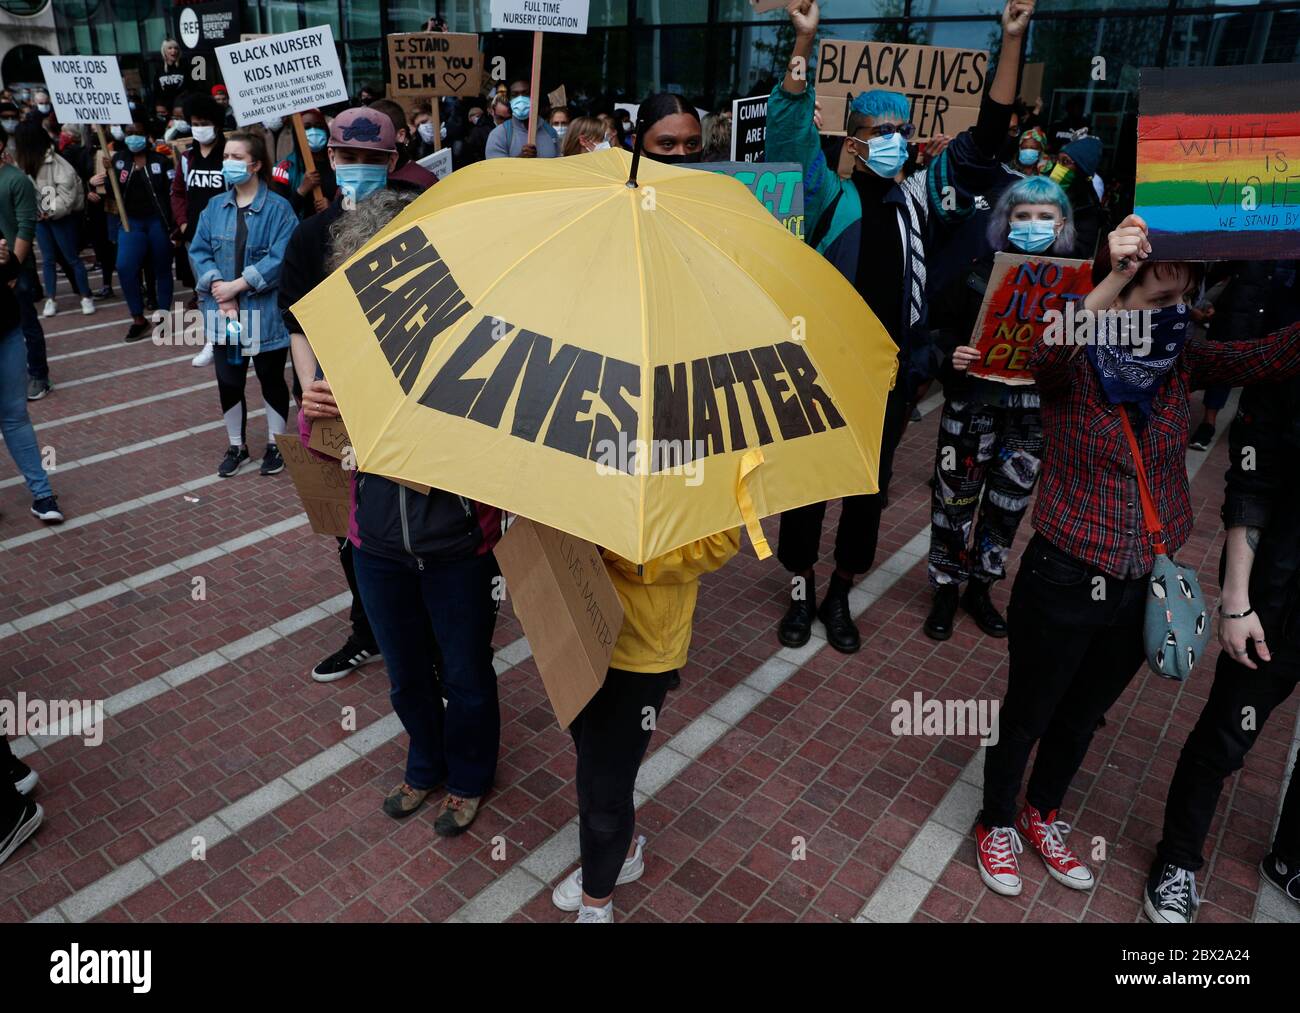 Birmingham, West Midlands, UK. 4th June 2020. Protesters attend a 'Black lives matter' demonstration following the death of American George Floyd while in the custody of Minneapolis police. Credit Darren Staples/Alamy Live News. Stock Photo